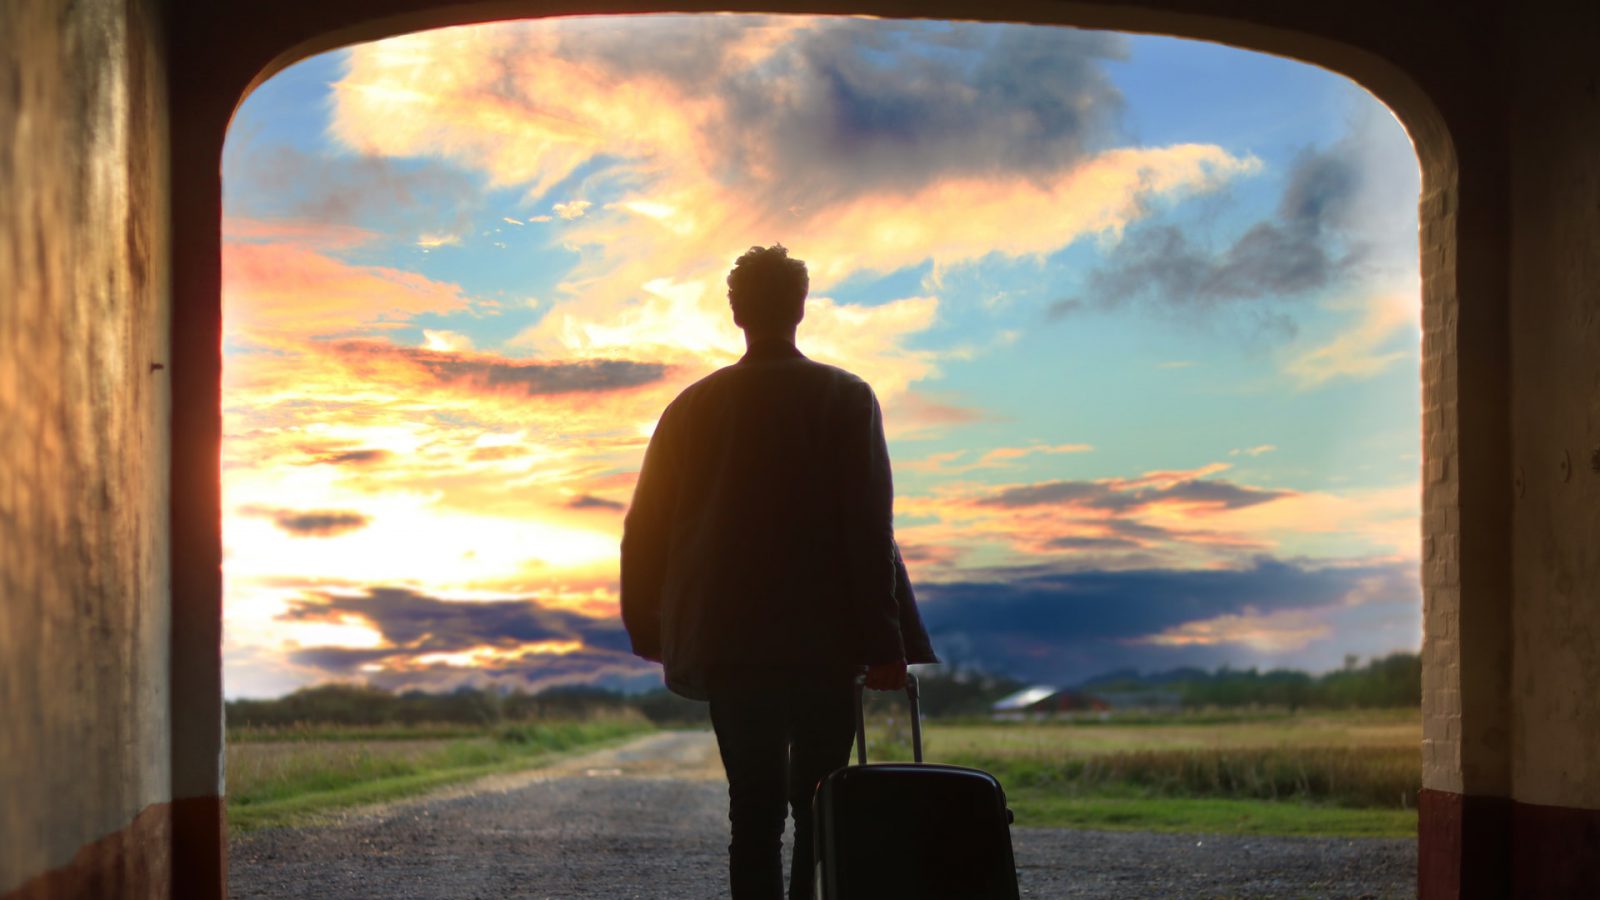 A person walking into a sunset with a suitcase representing leaving a job for another one